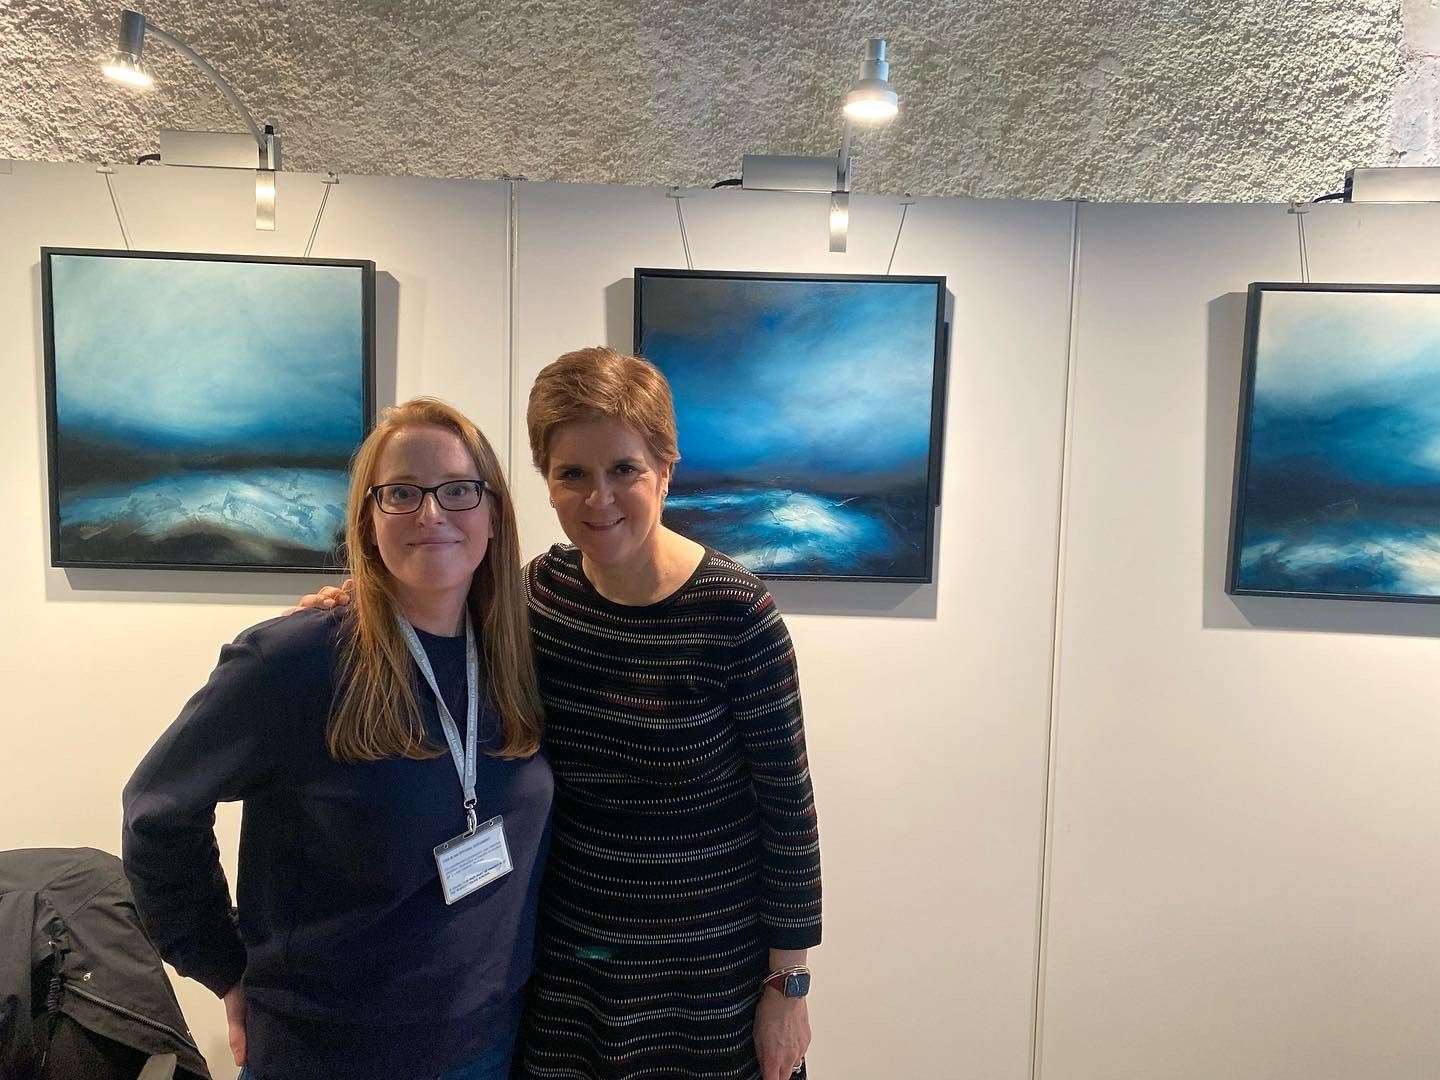 The First Minister Nicola Sturgeon stopped to talk to Reina Edmiston about her work during the exhibition.